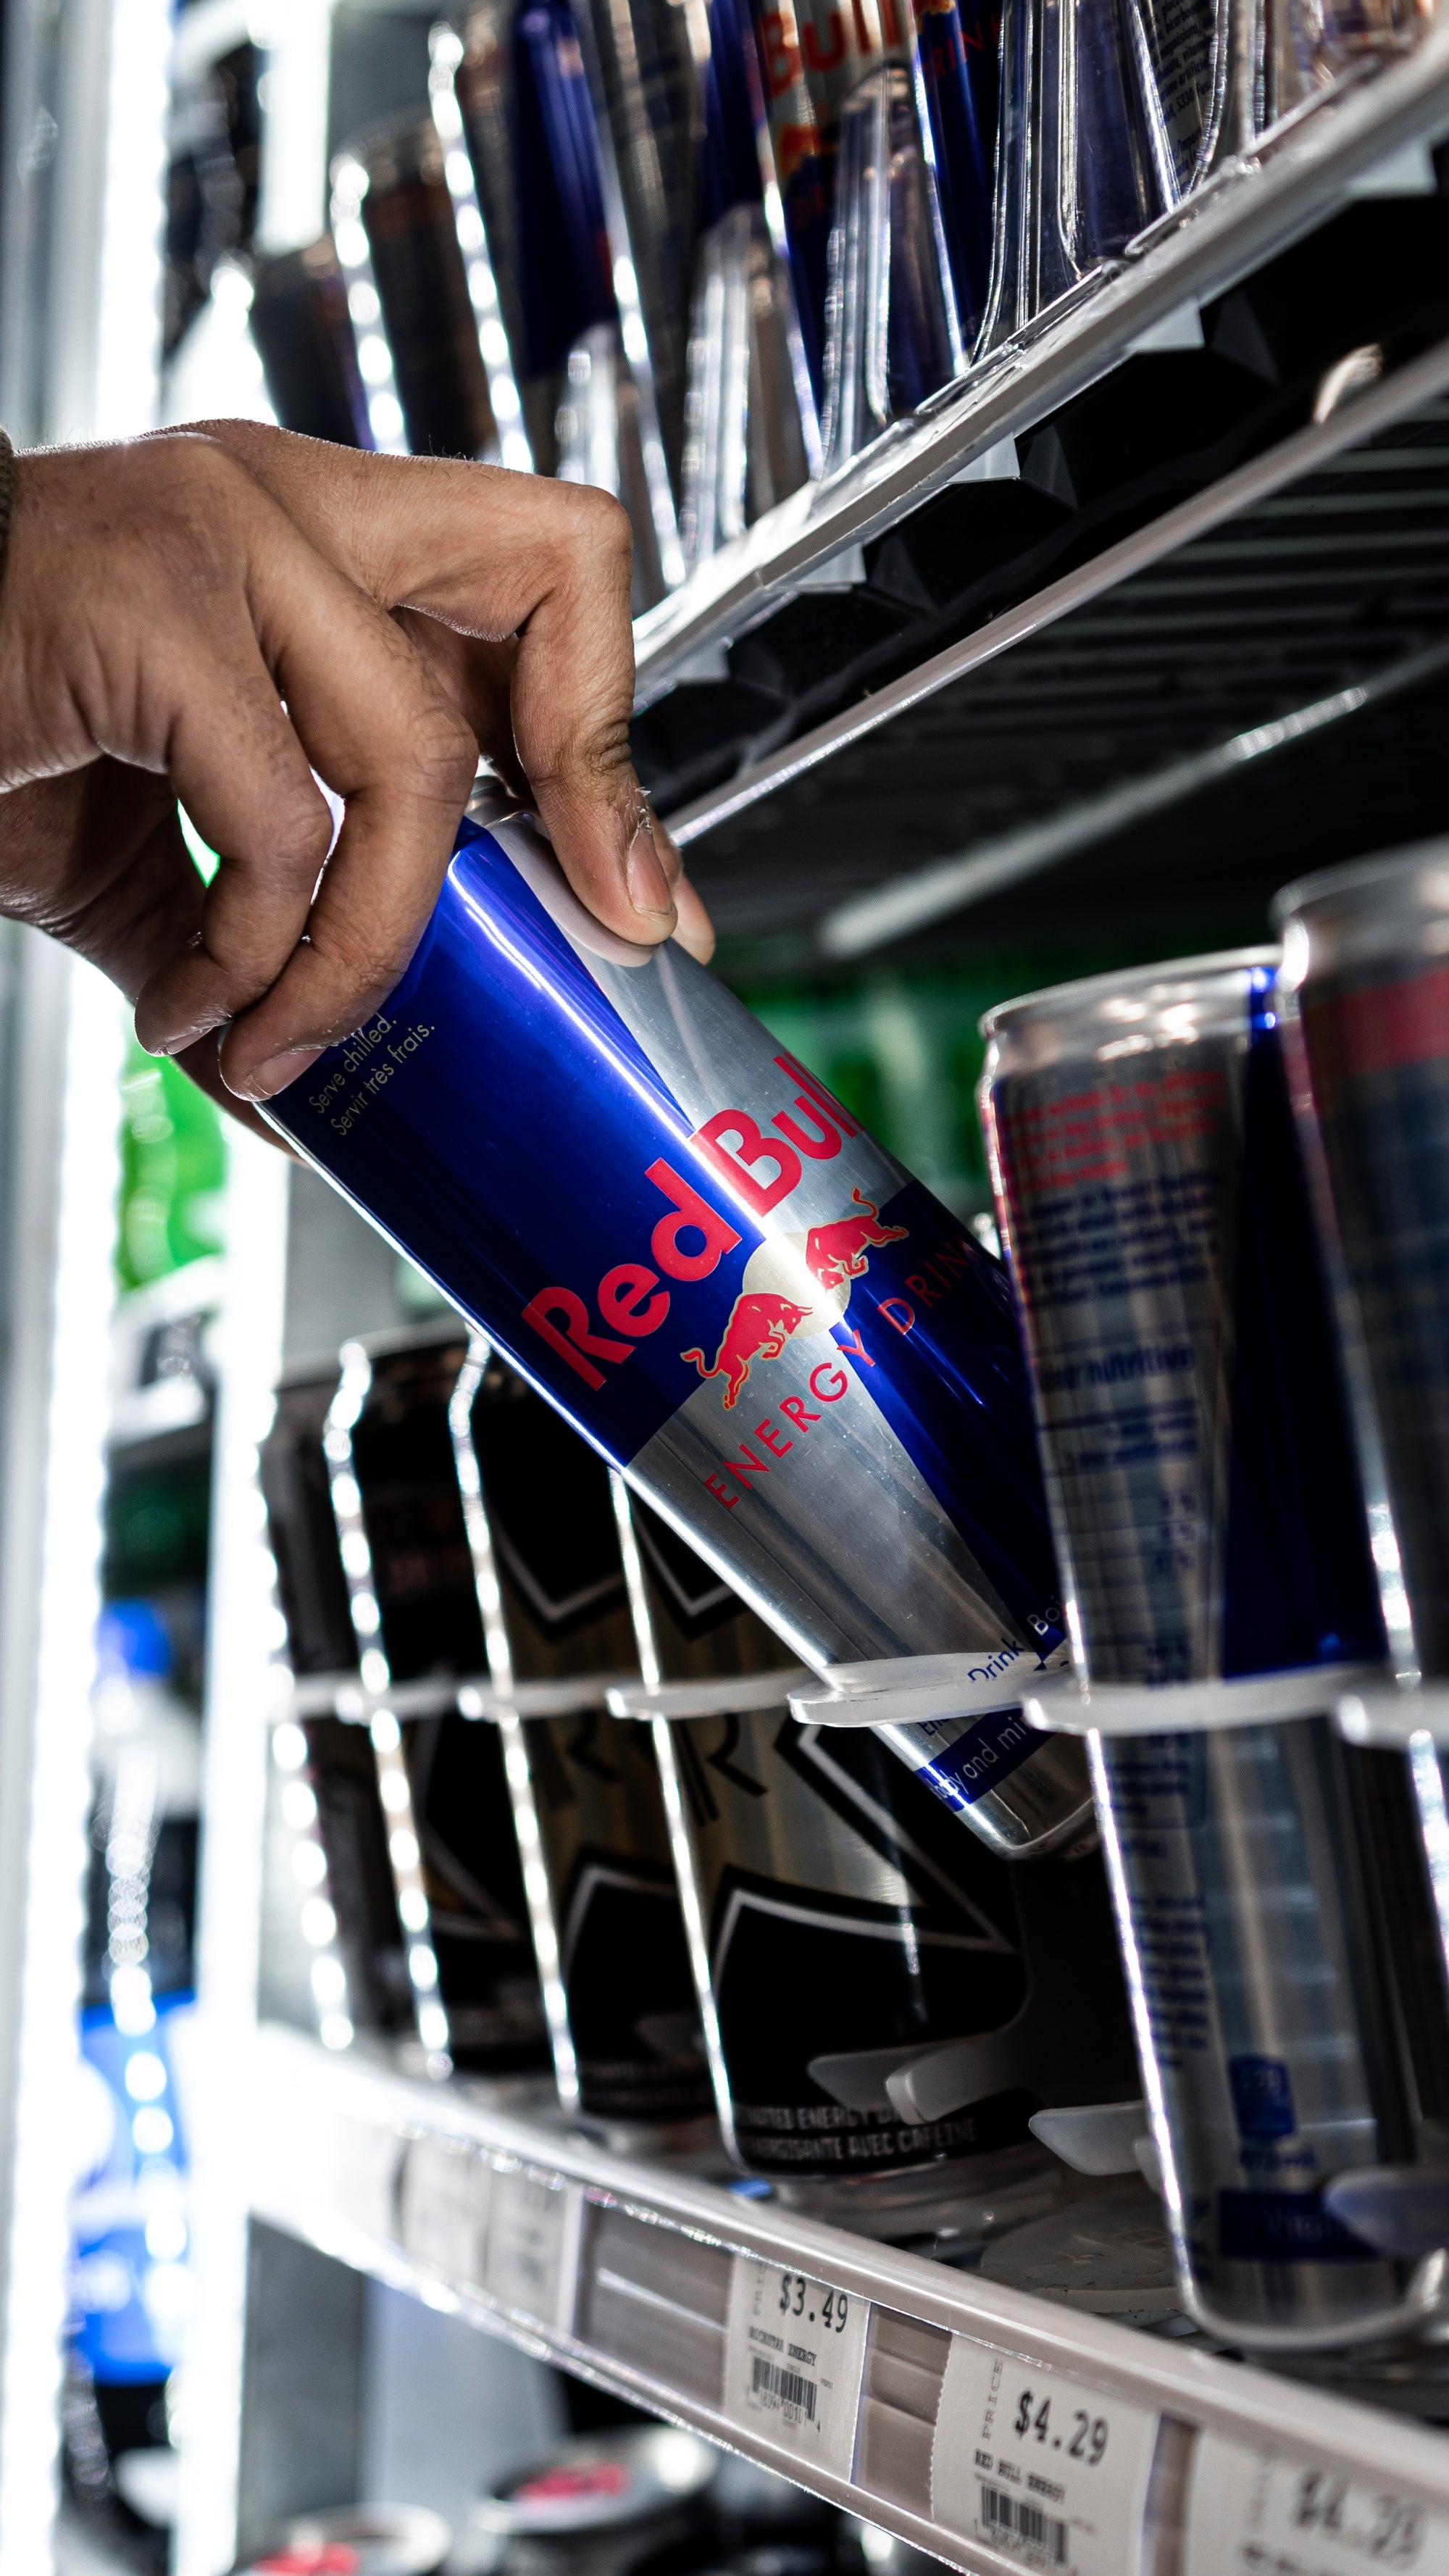 Red Bull [A Deep Dive Into The World's Most Popular Energy Drink]